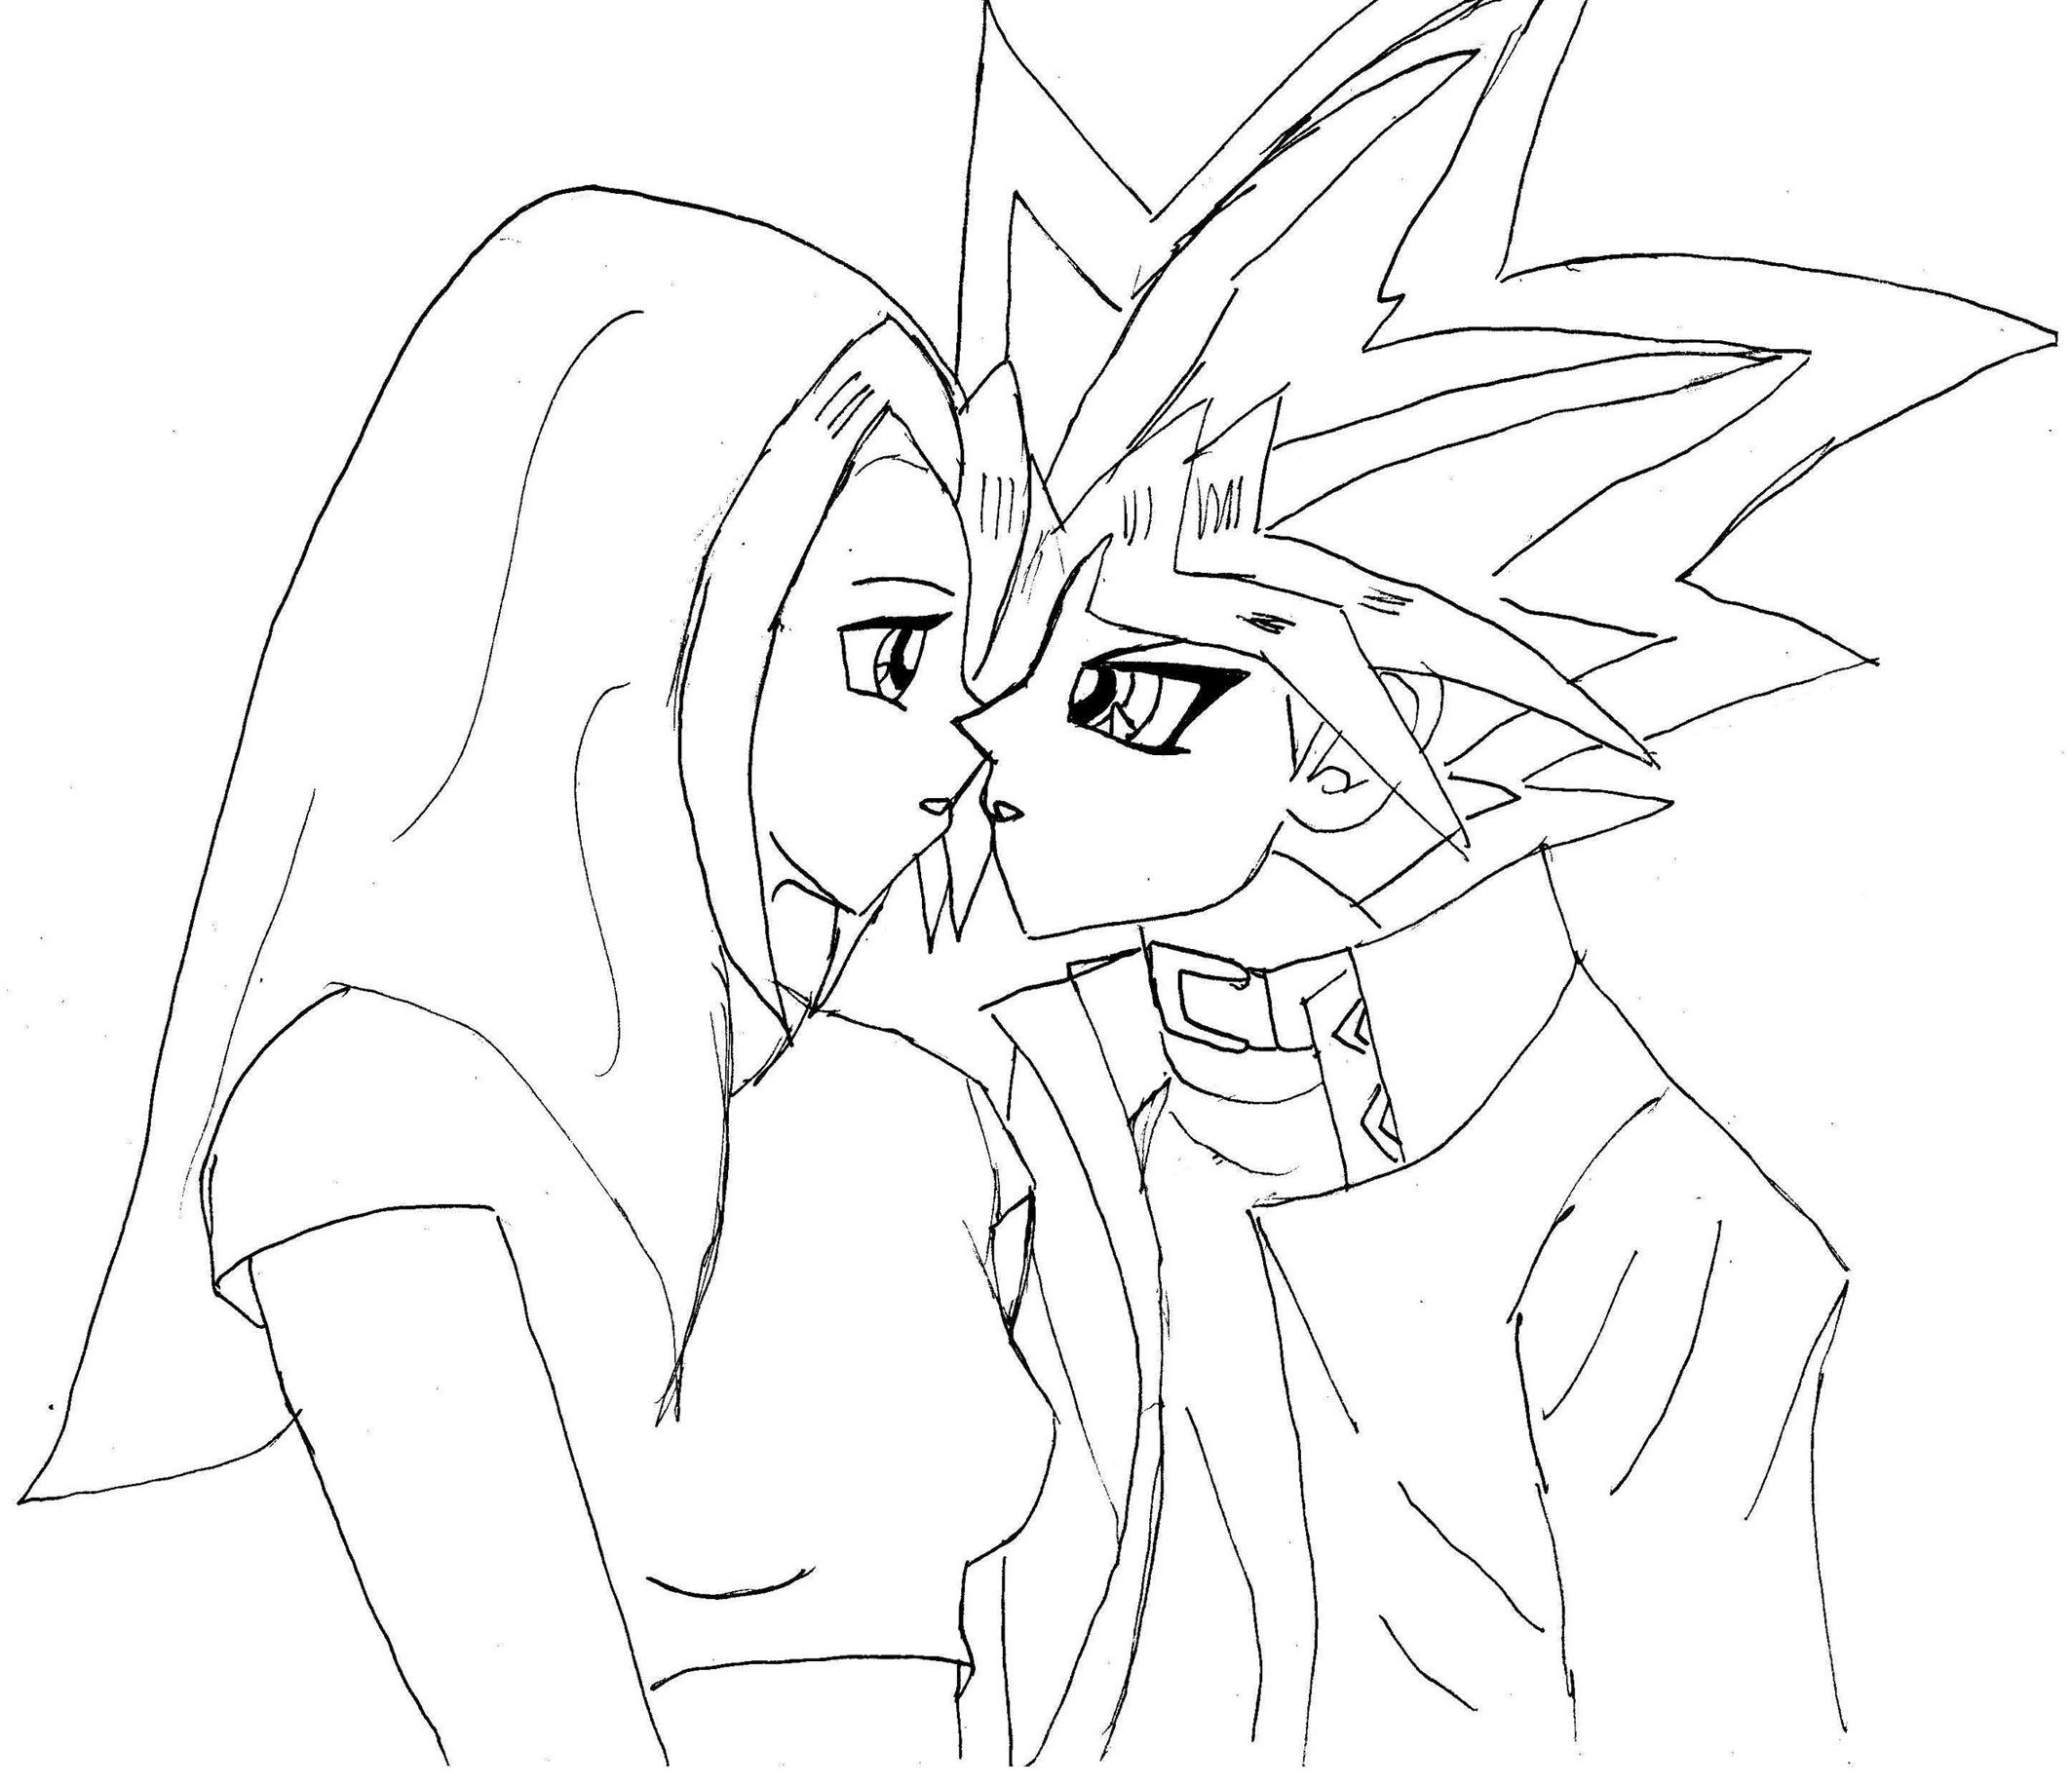 Kiss her,Yami,Kiss her!!! by YGOfan